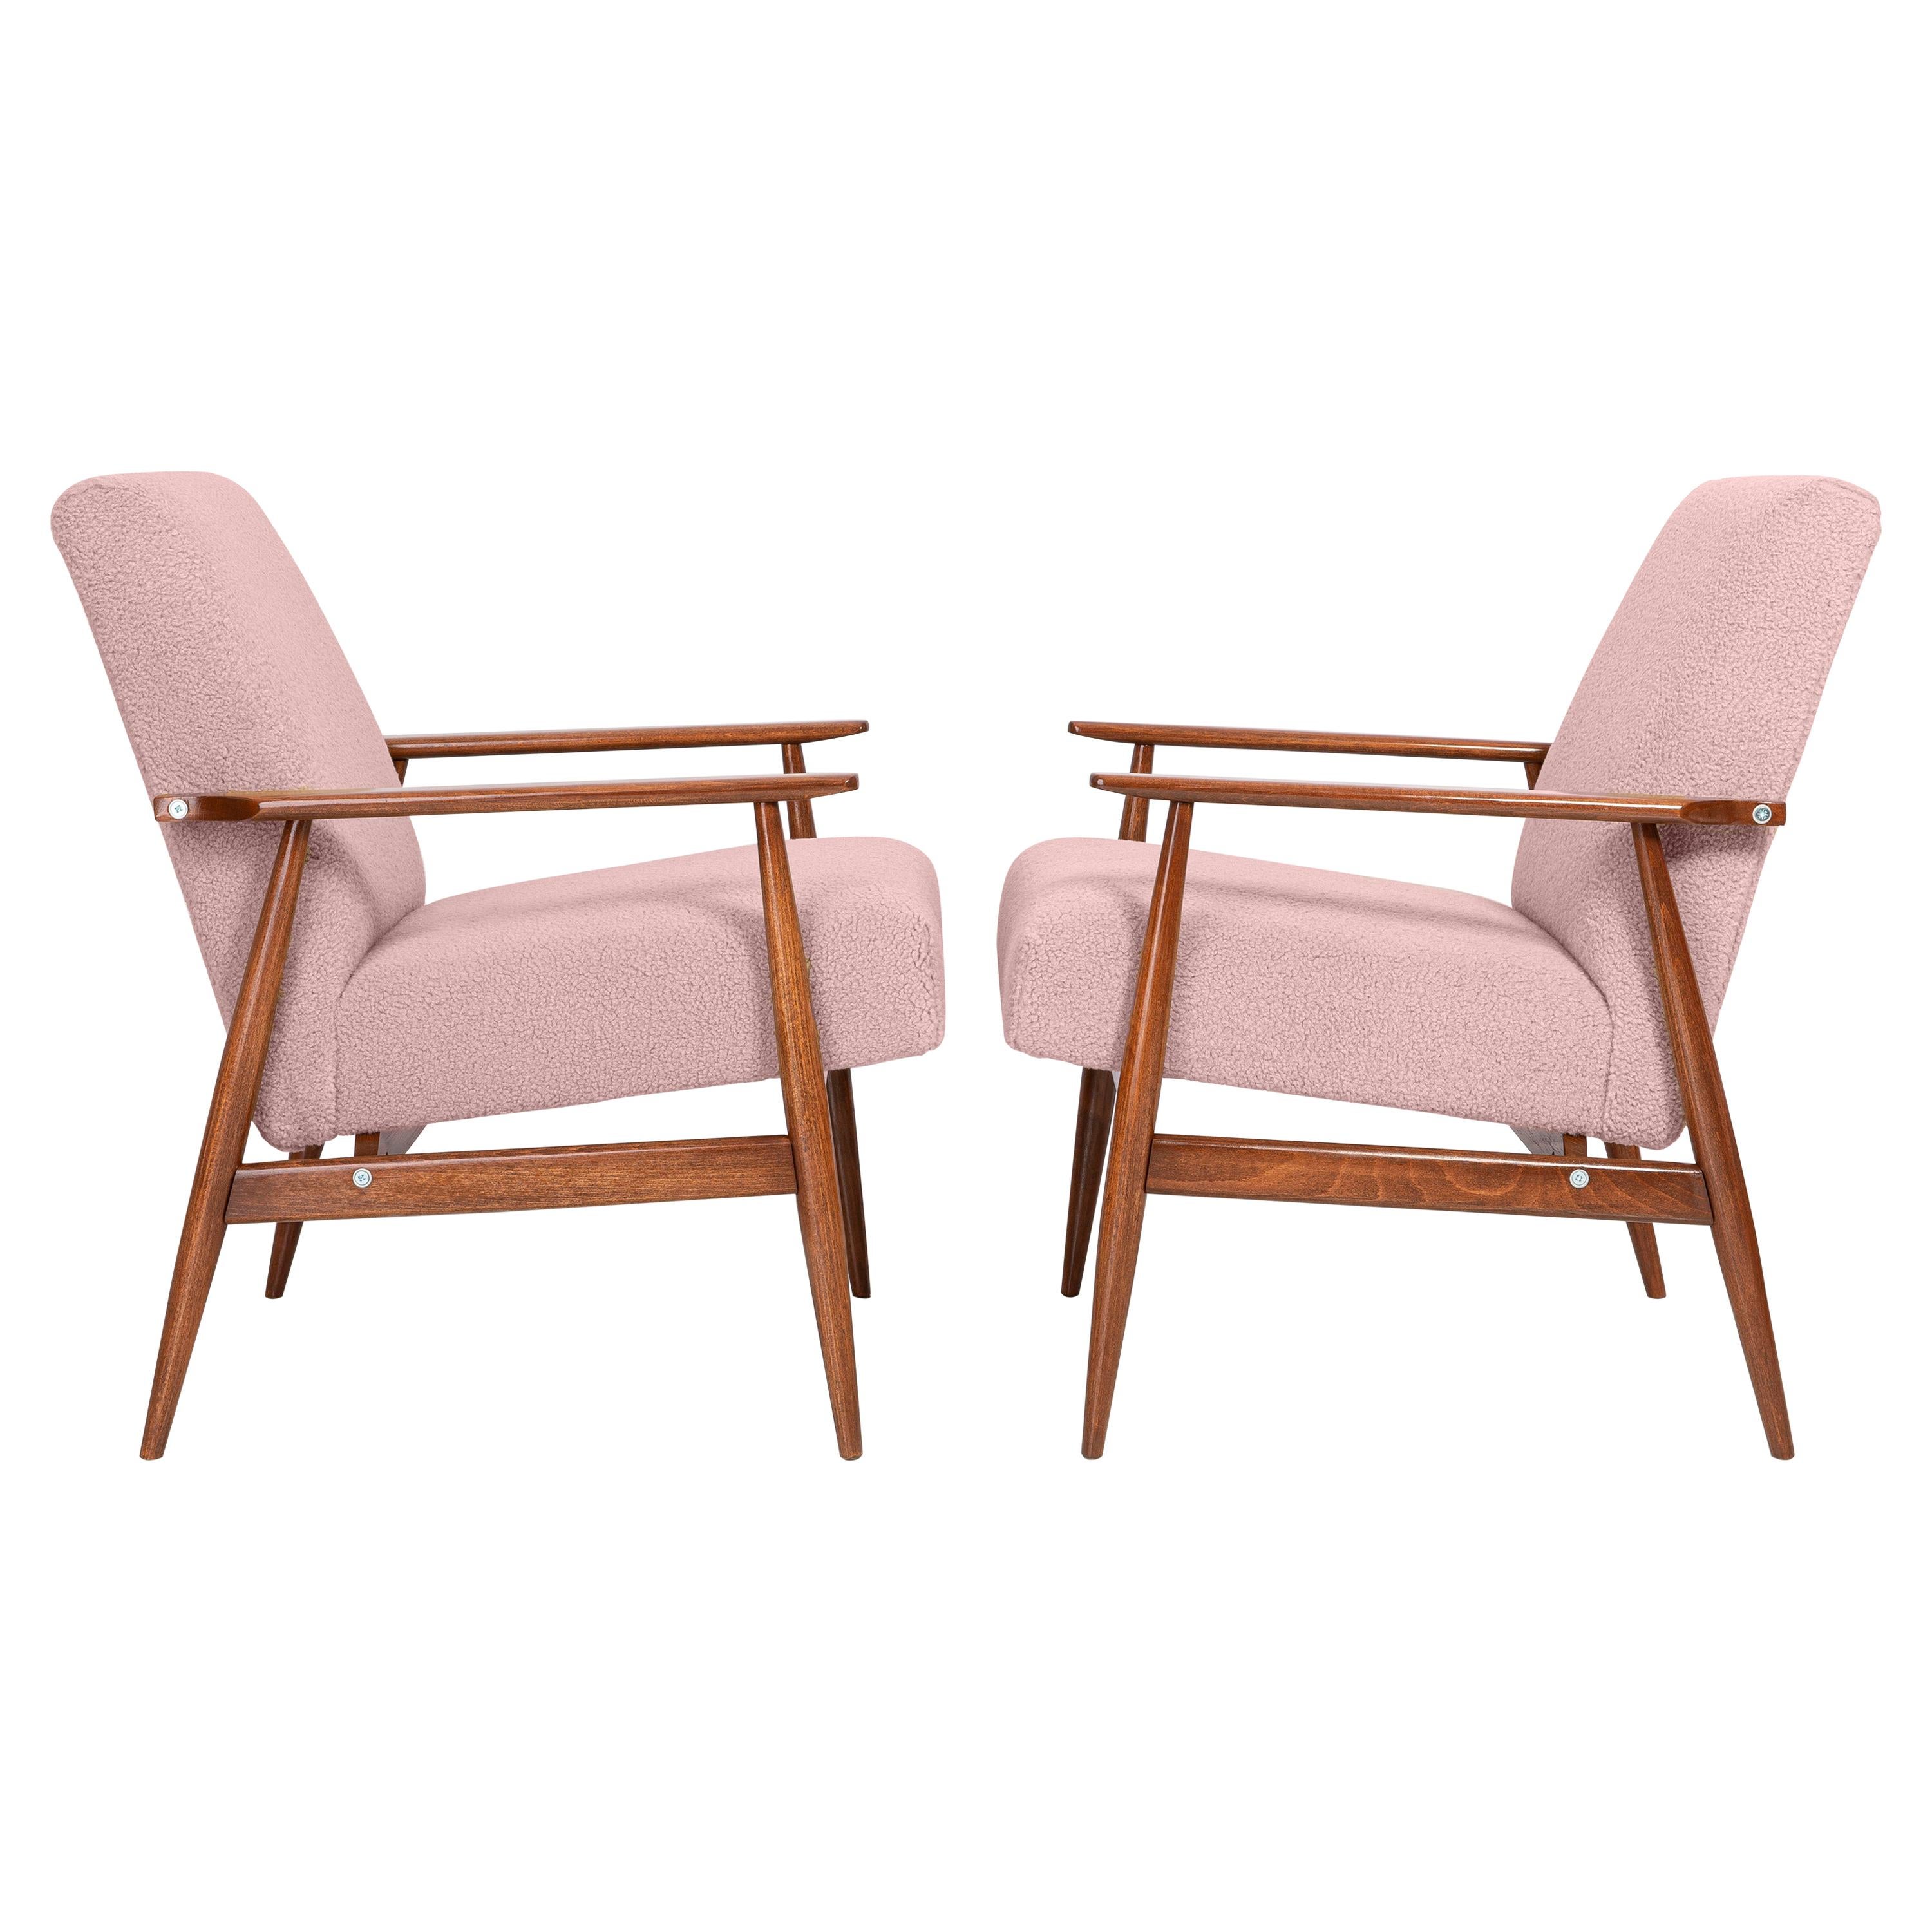 Pair of Dusty Pink Bouclé Dante Armchairs, H. Lis, Europe, 1960s For Sale